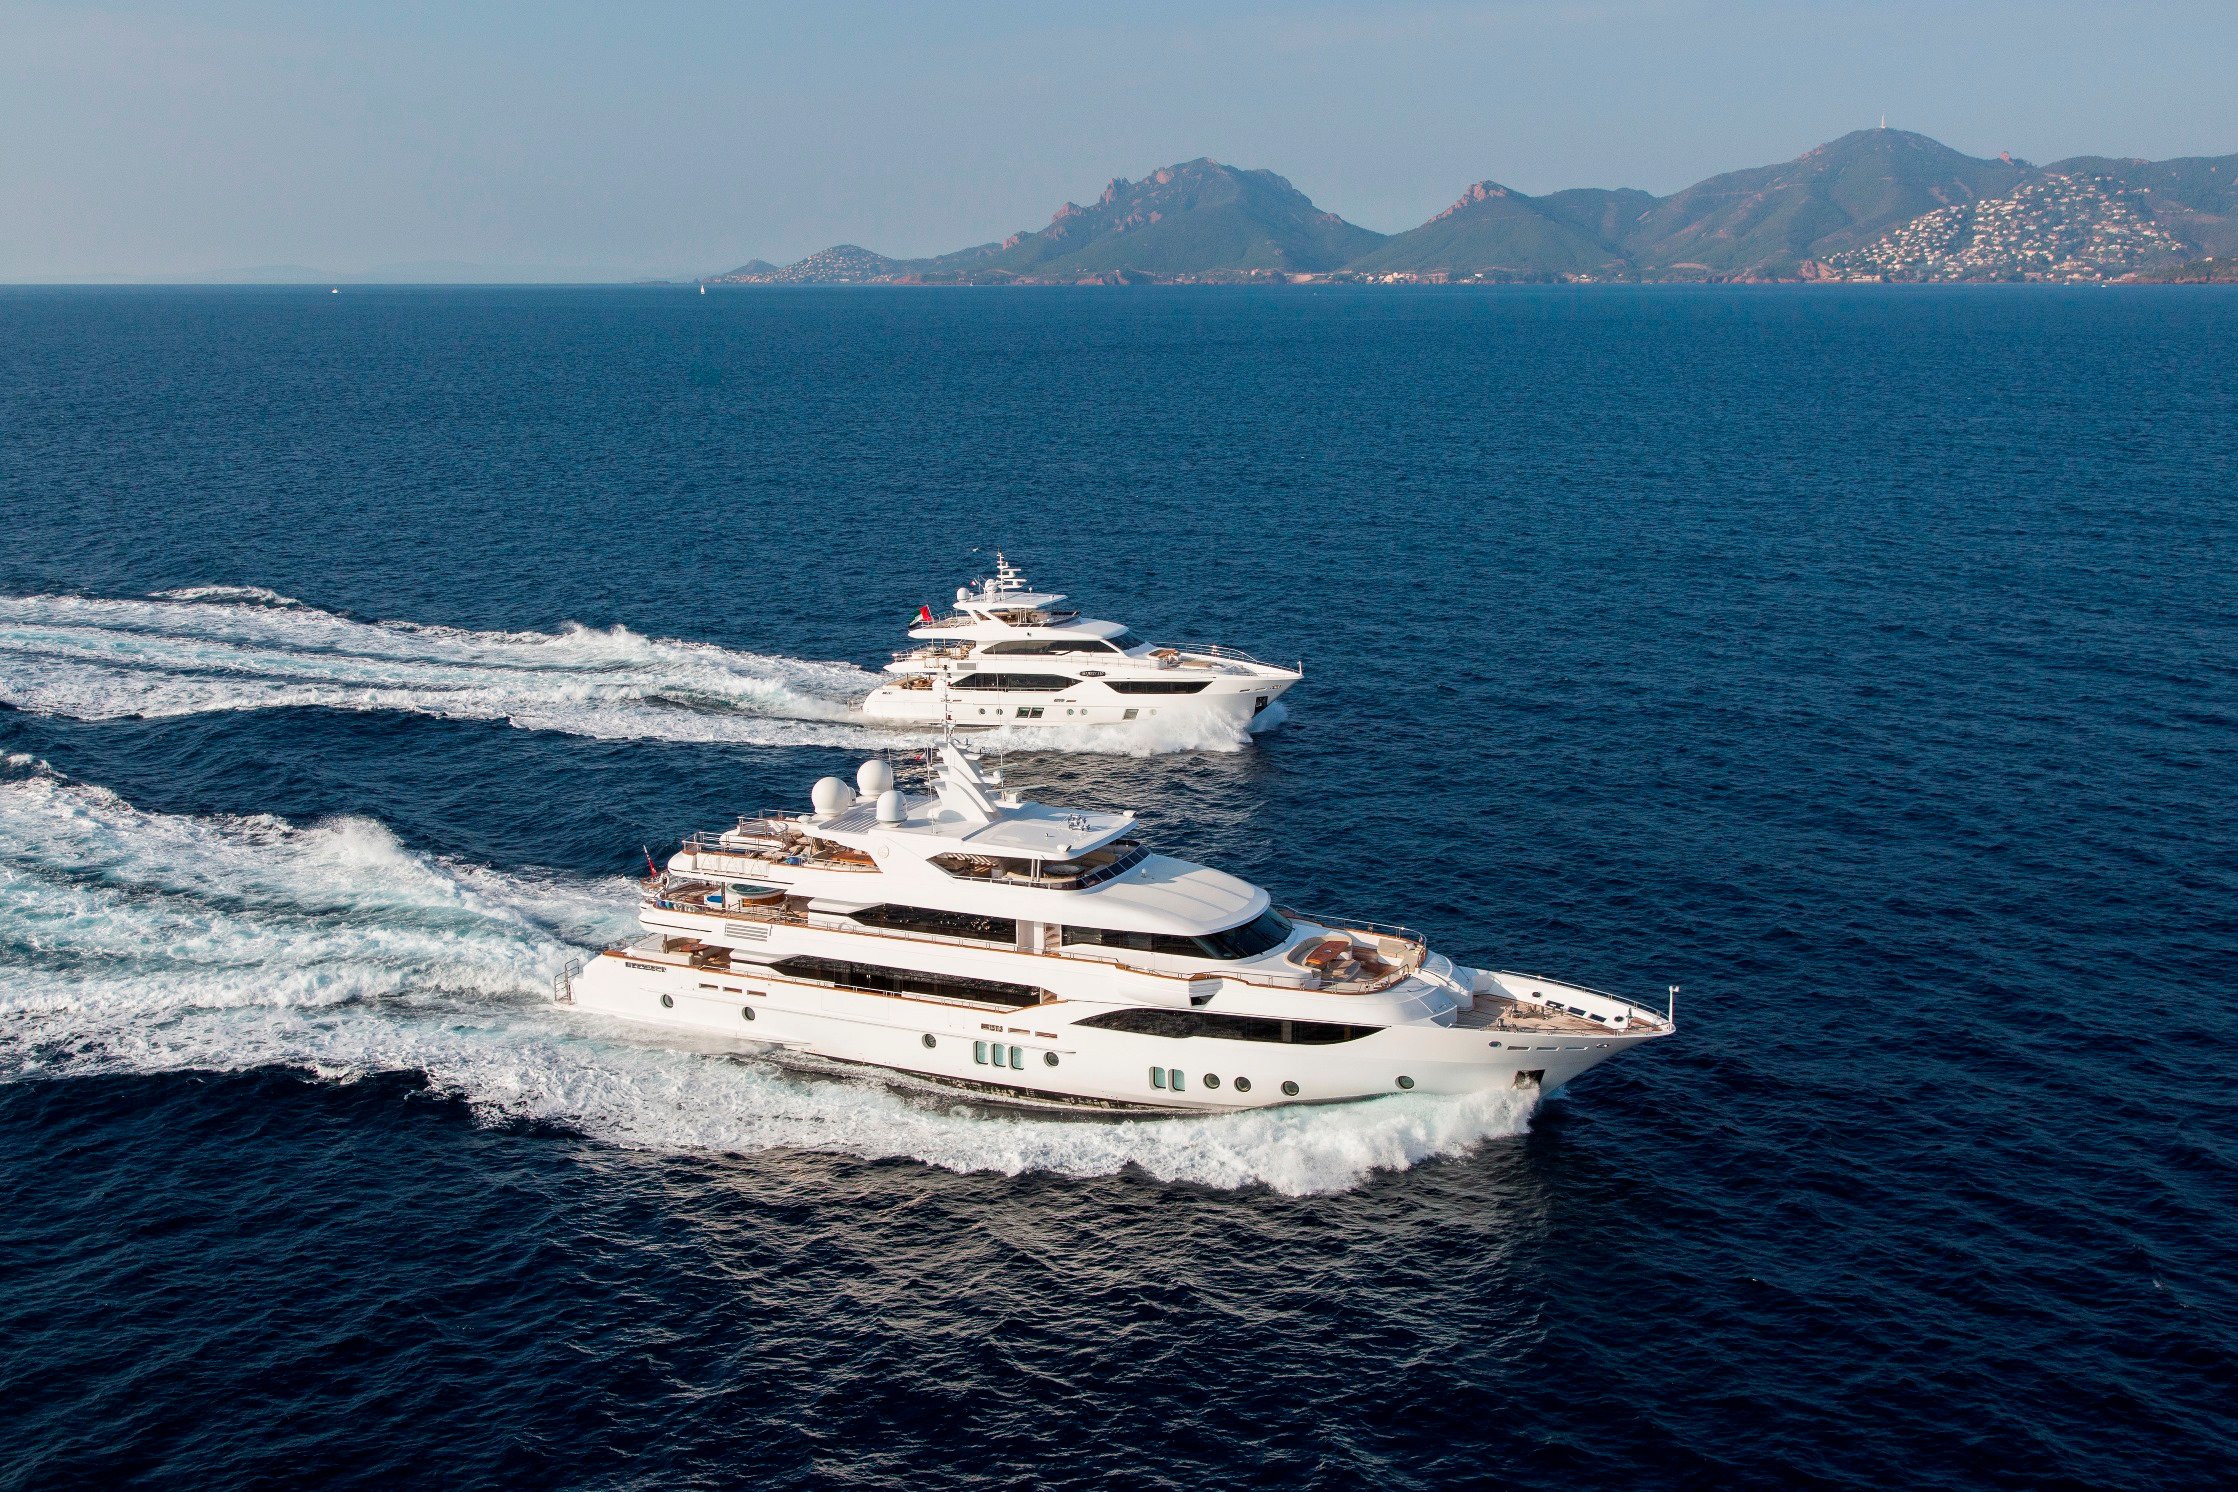 Majesty 155 and Majesty 110 in Cannes, France 005.jpg